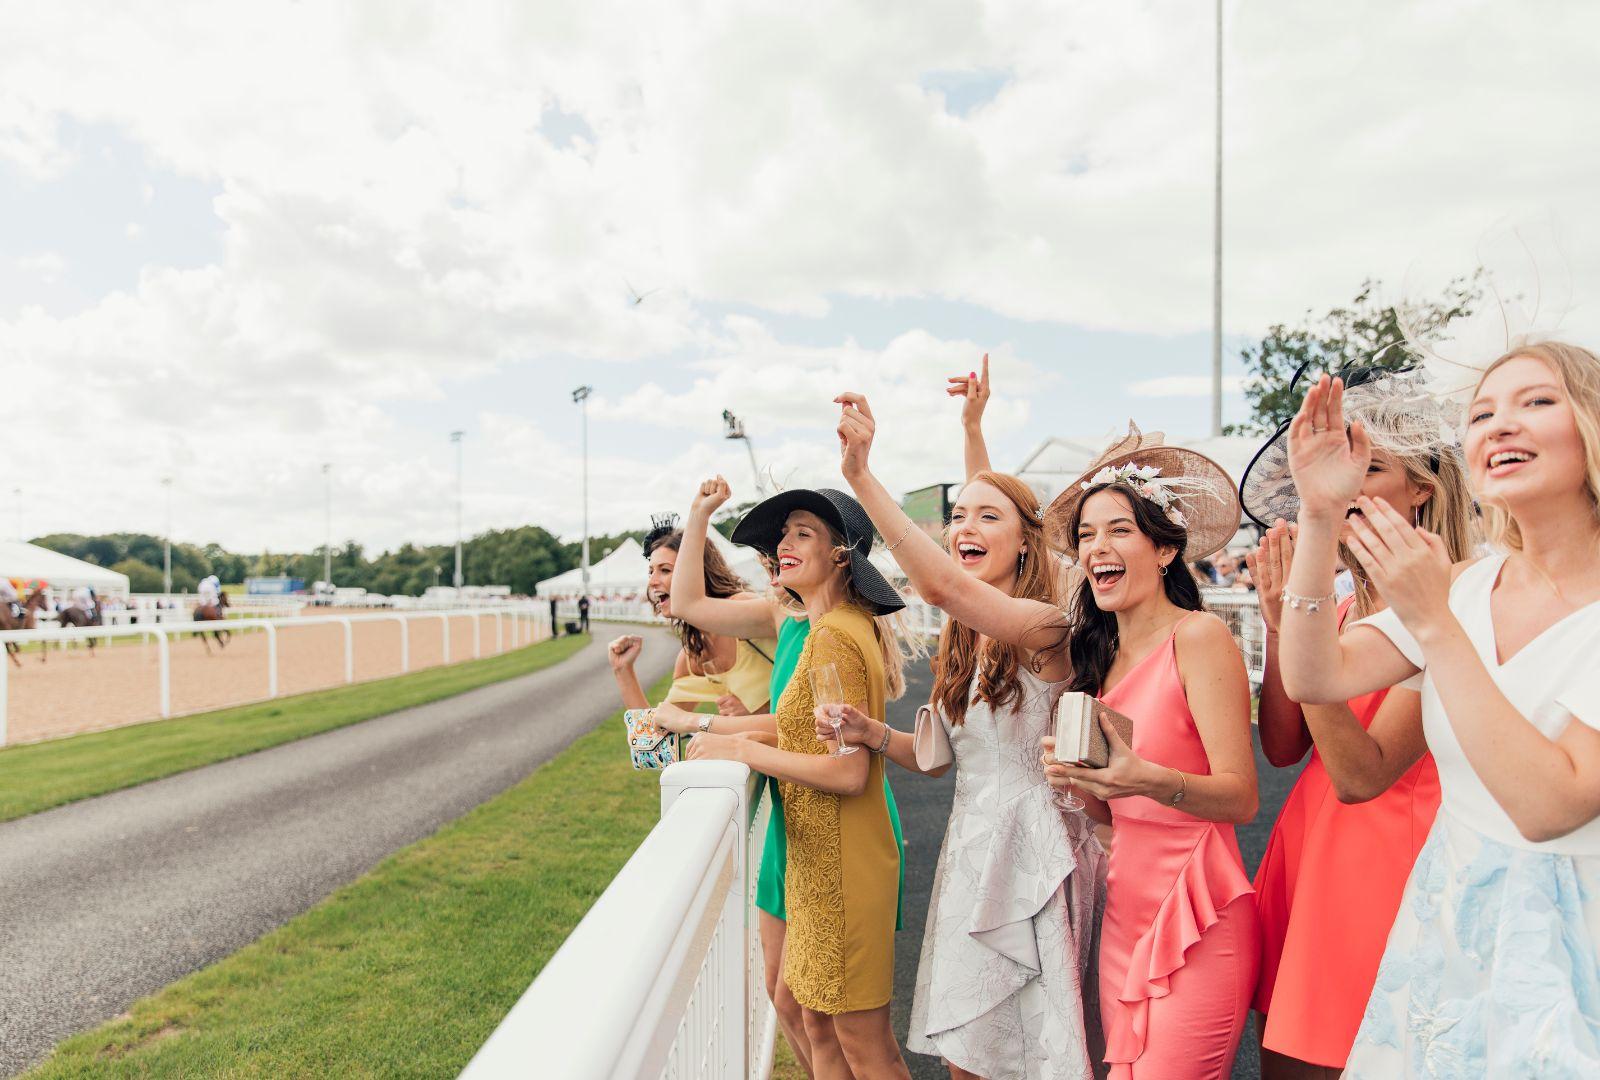 Crowd Cheering On Horses At The Derby